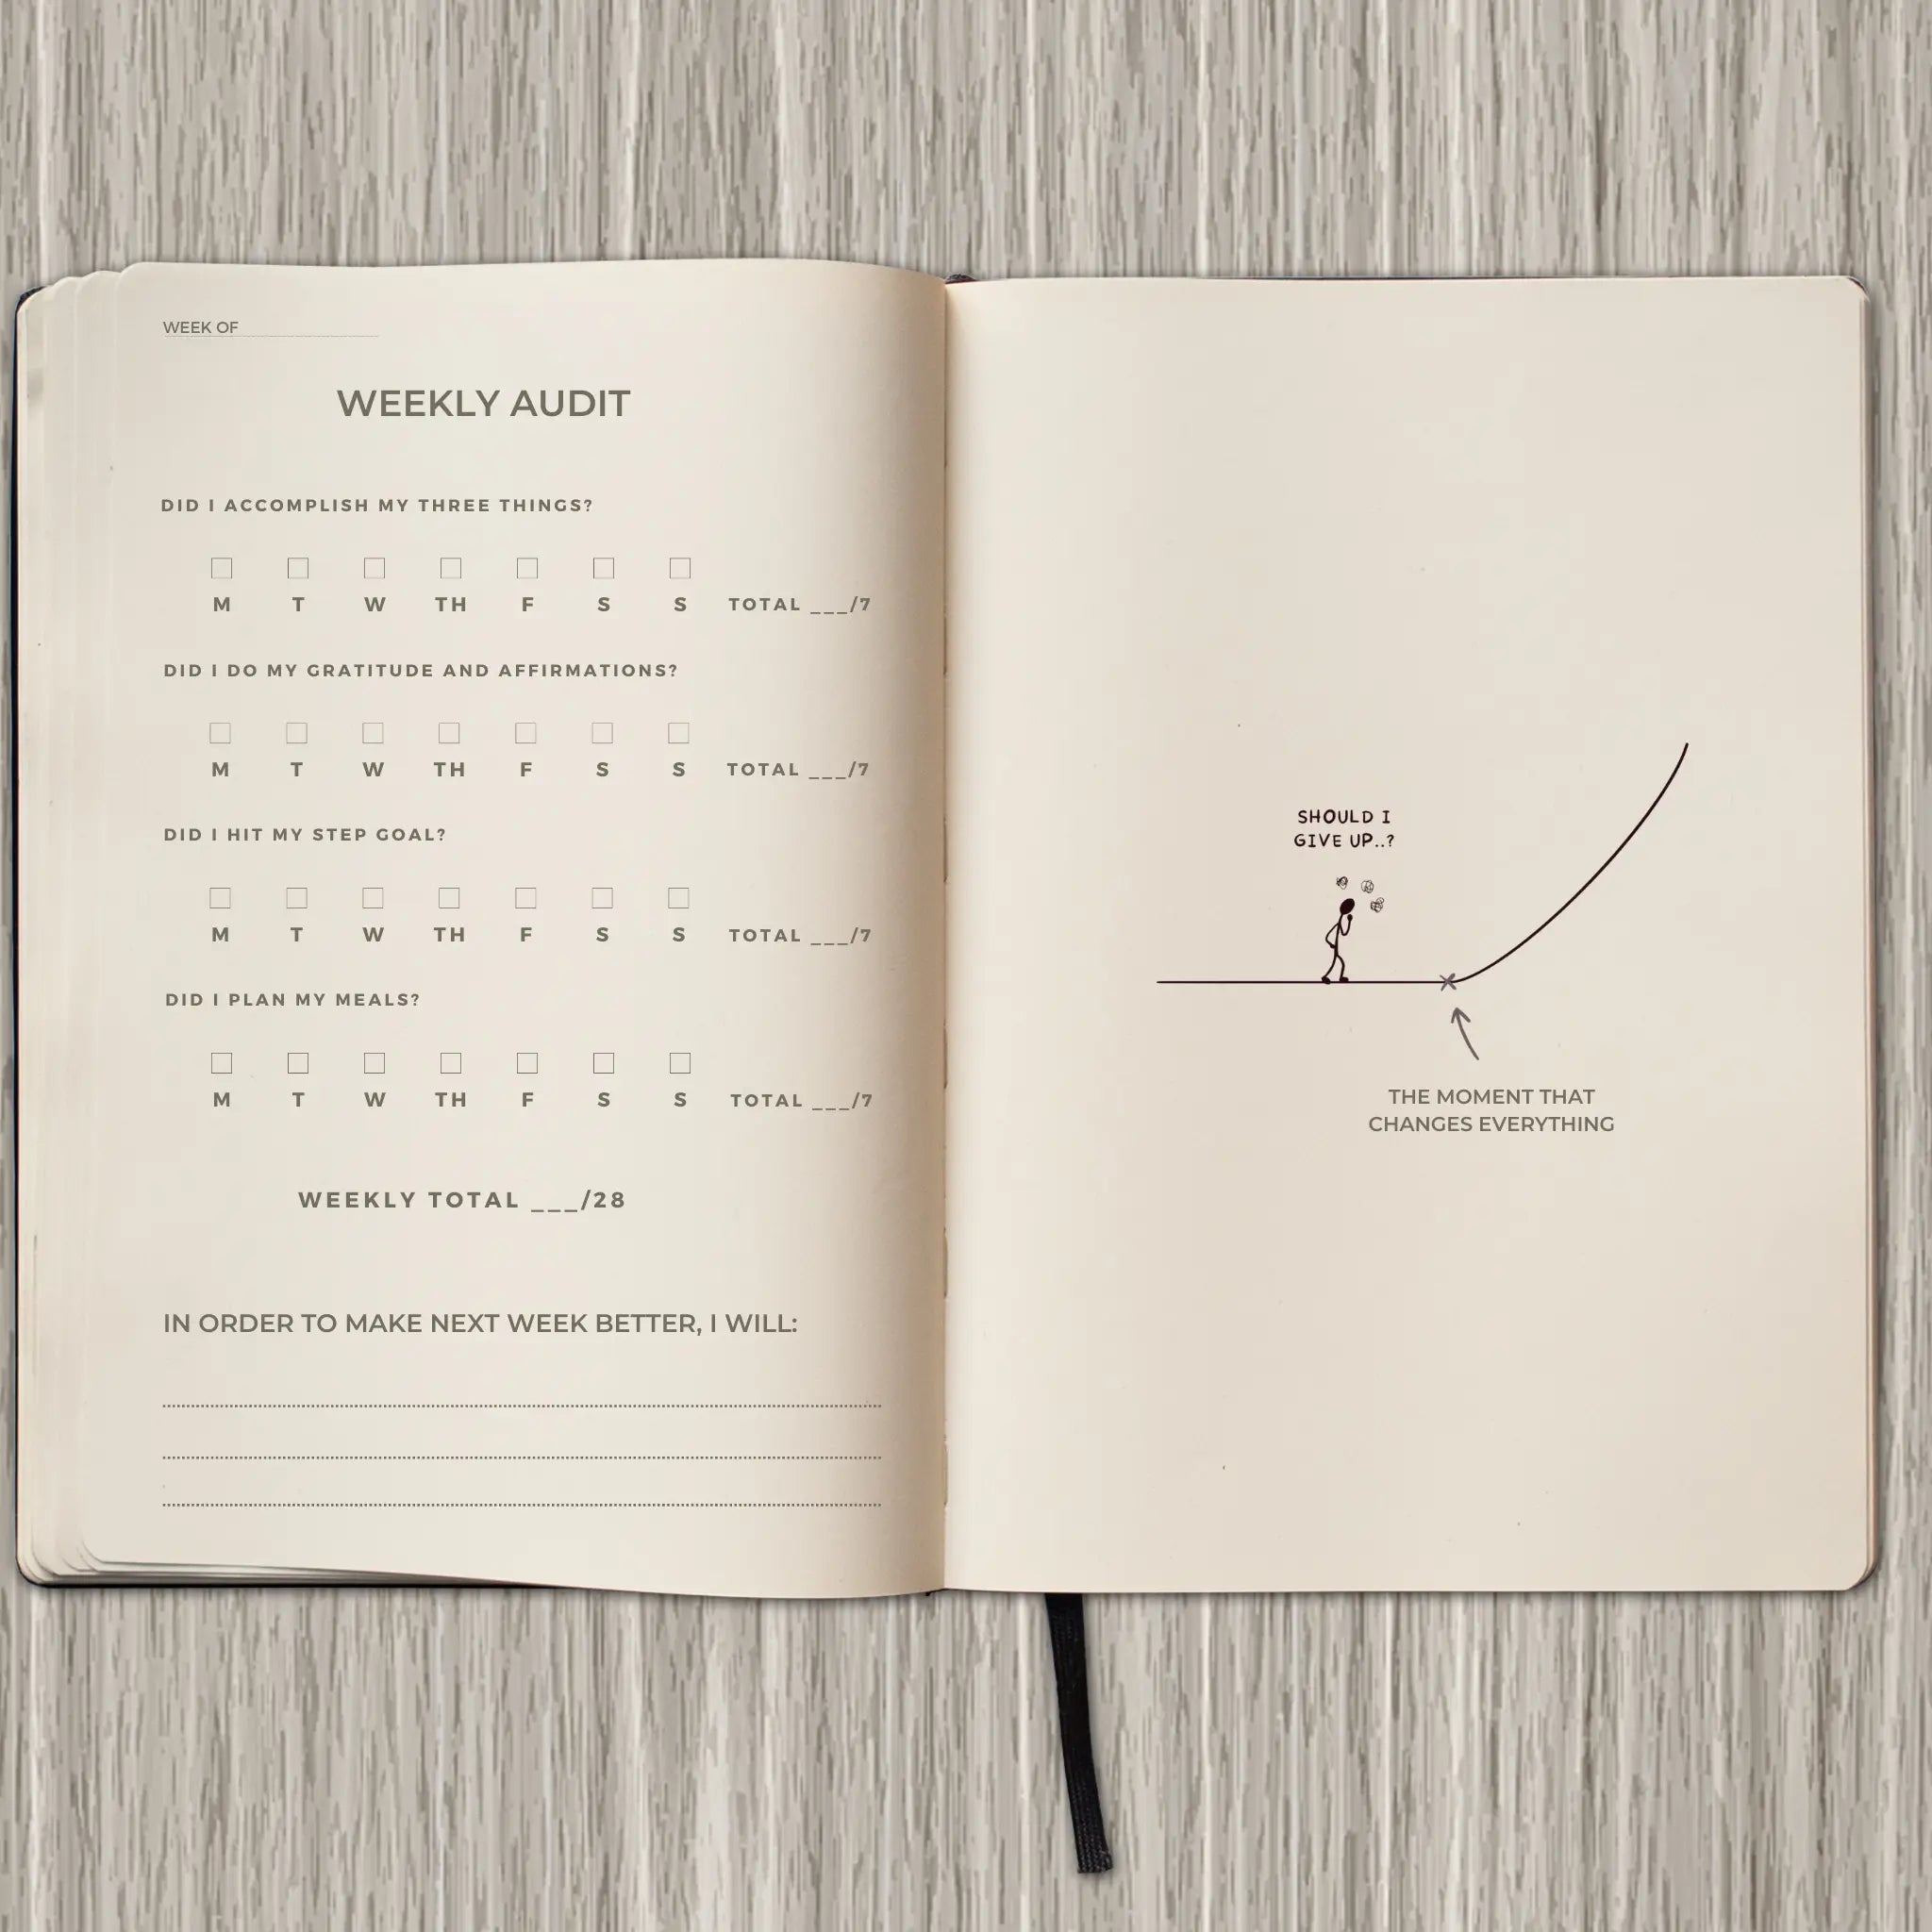 Productivity planner that lays the foundations of your health daily